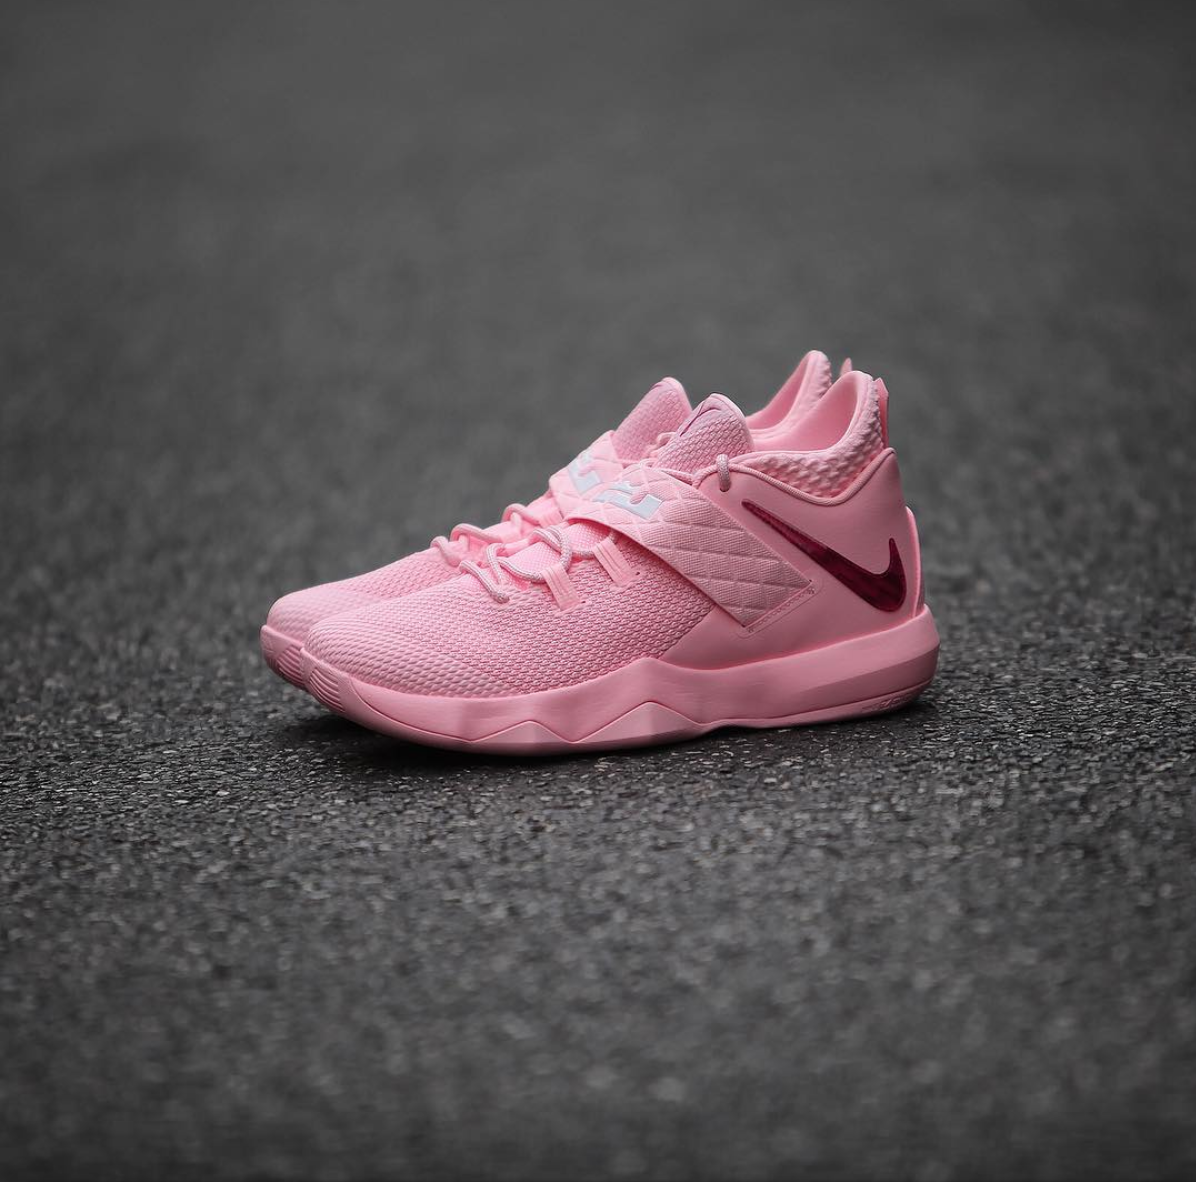 kd breast cancer shoes